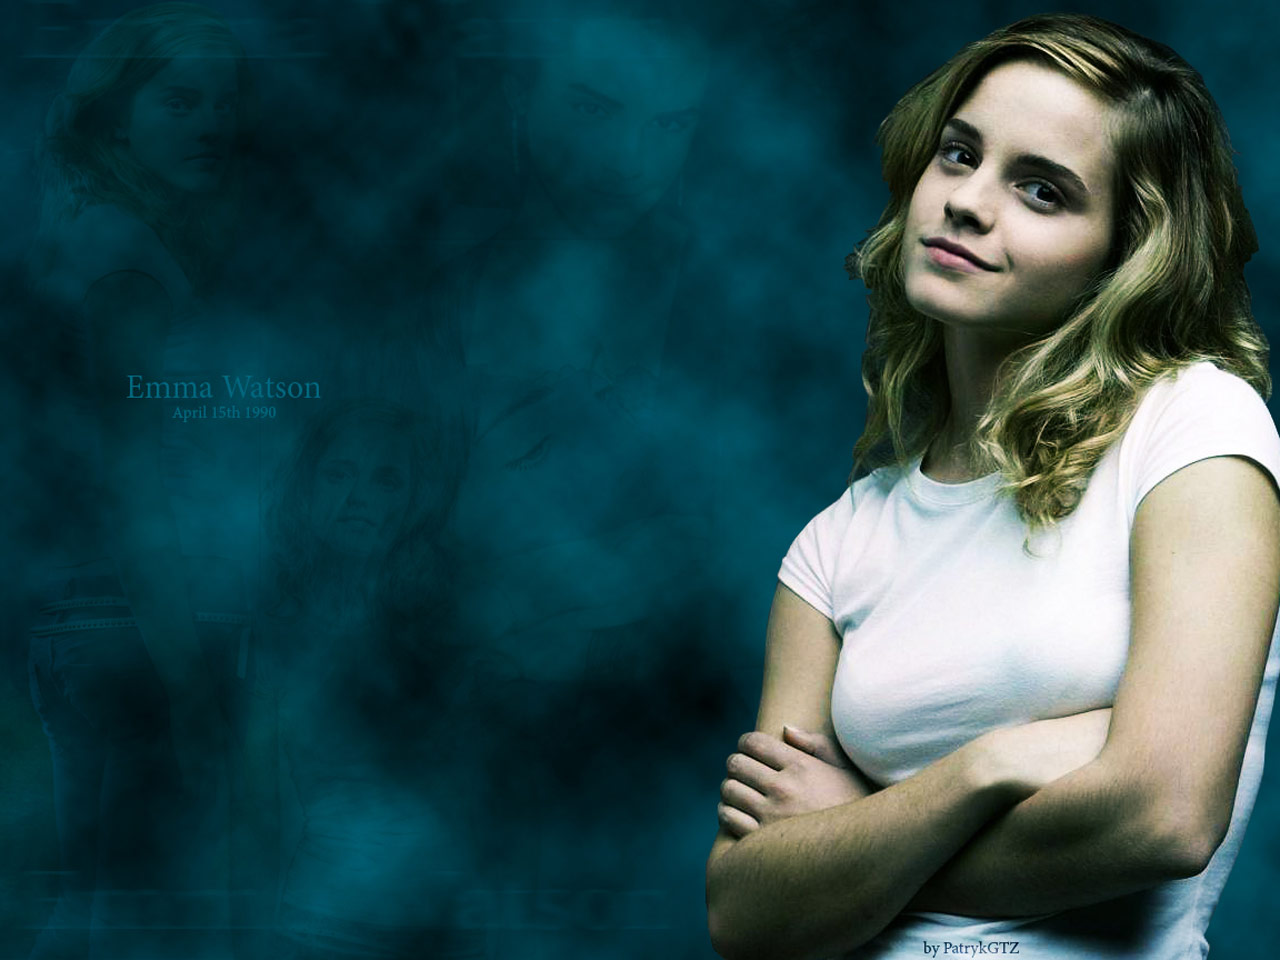 Emma Watson Picture - Image Abyss.